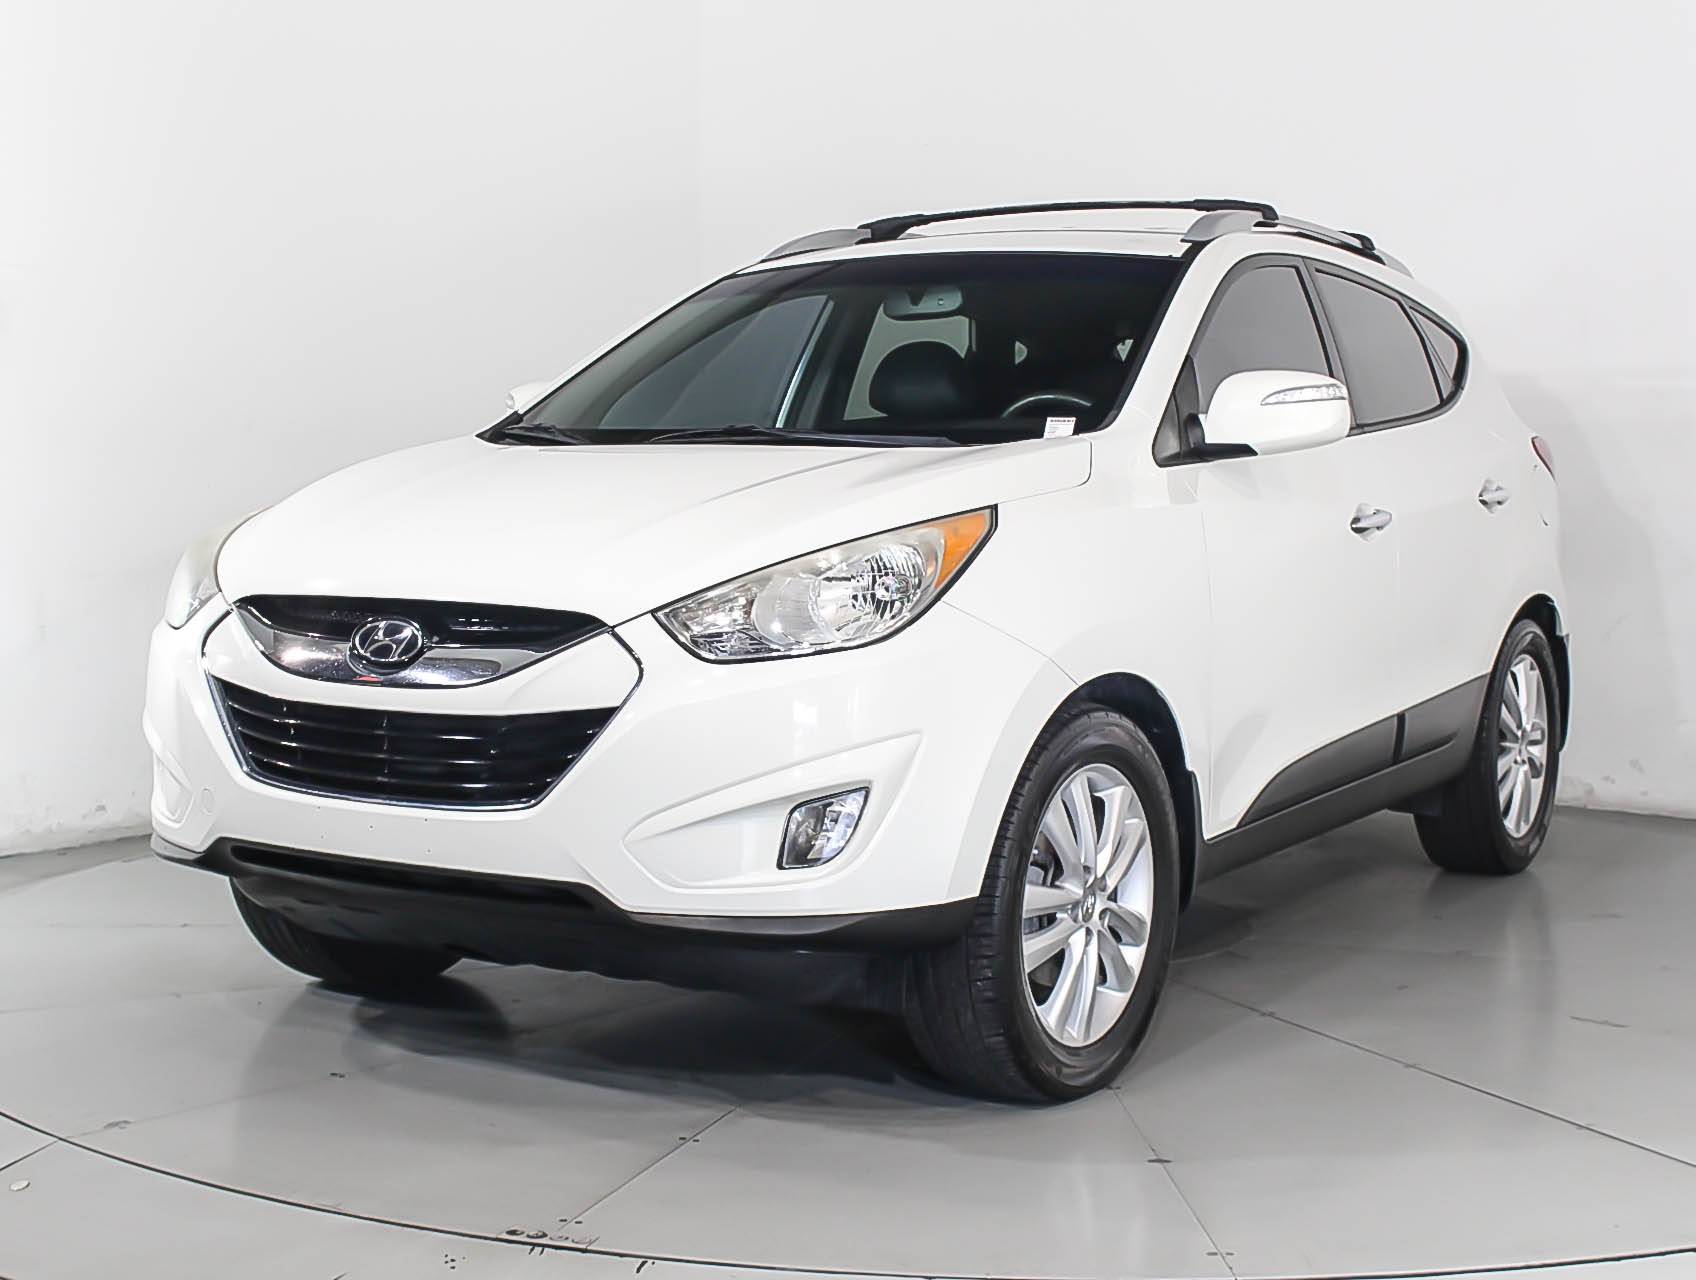 Used 2012 HYUNDAI TUCSON Limited for sale in HOLLYWOOD | 101013